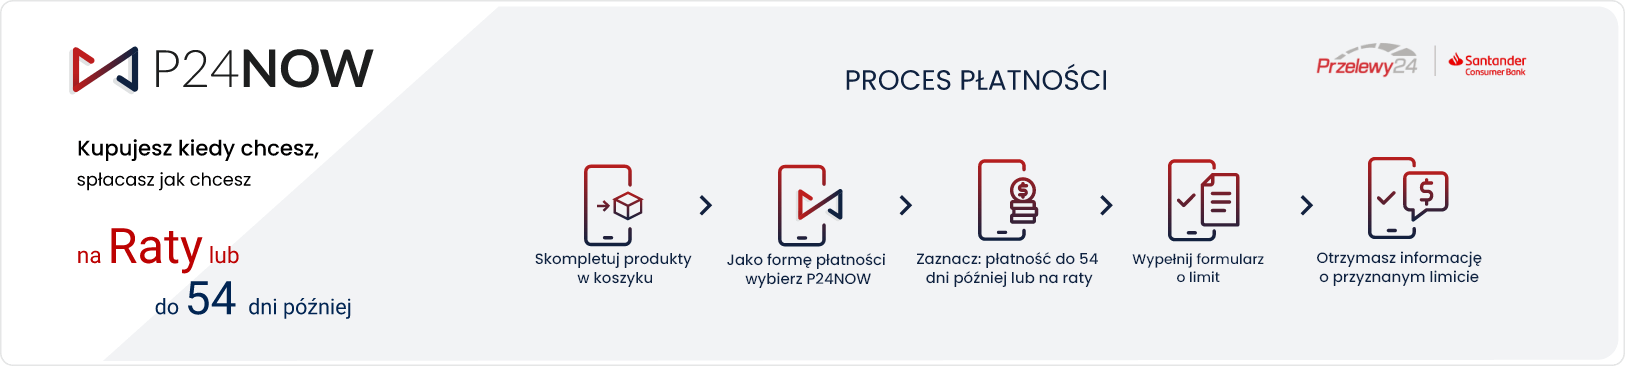 P24NOW_payment_process_png_2.png